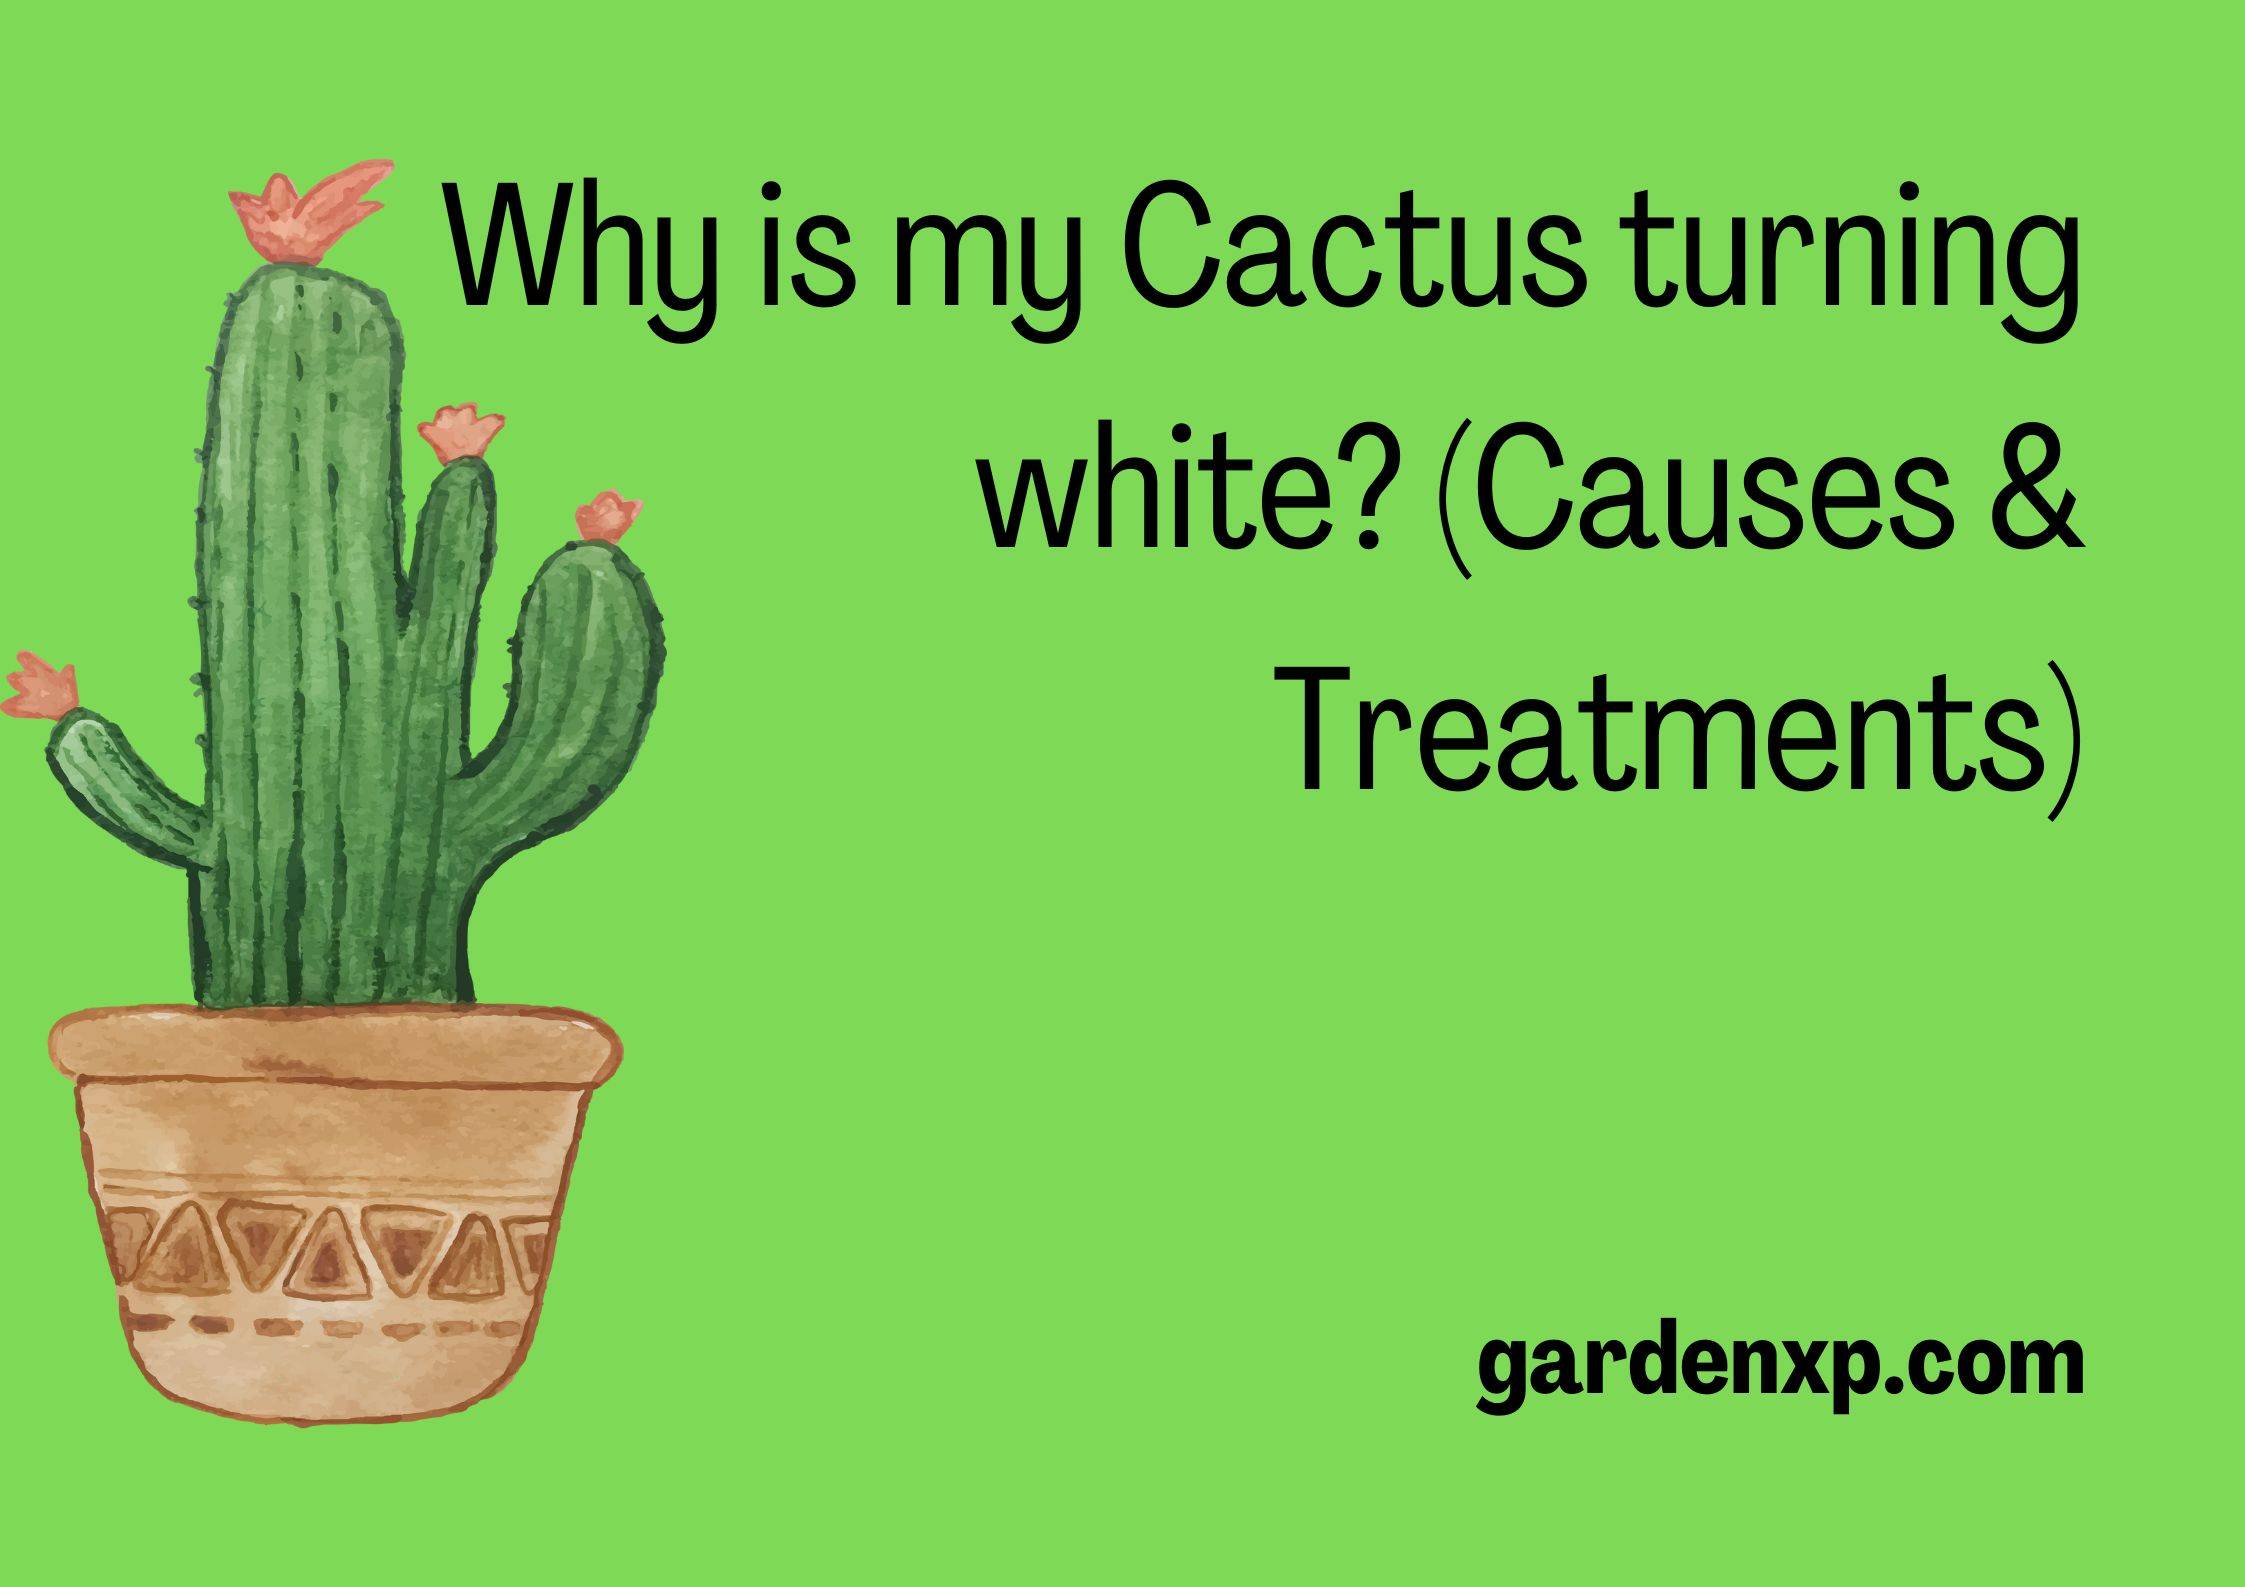 Why is my Cactus turning white? (Causes & Treatments)